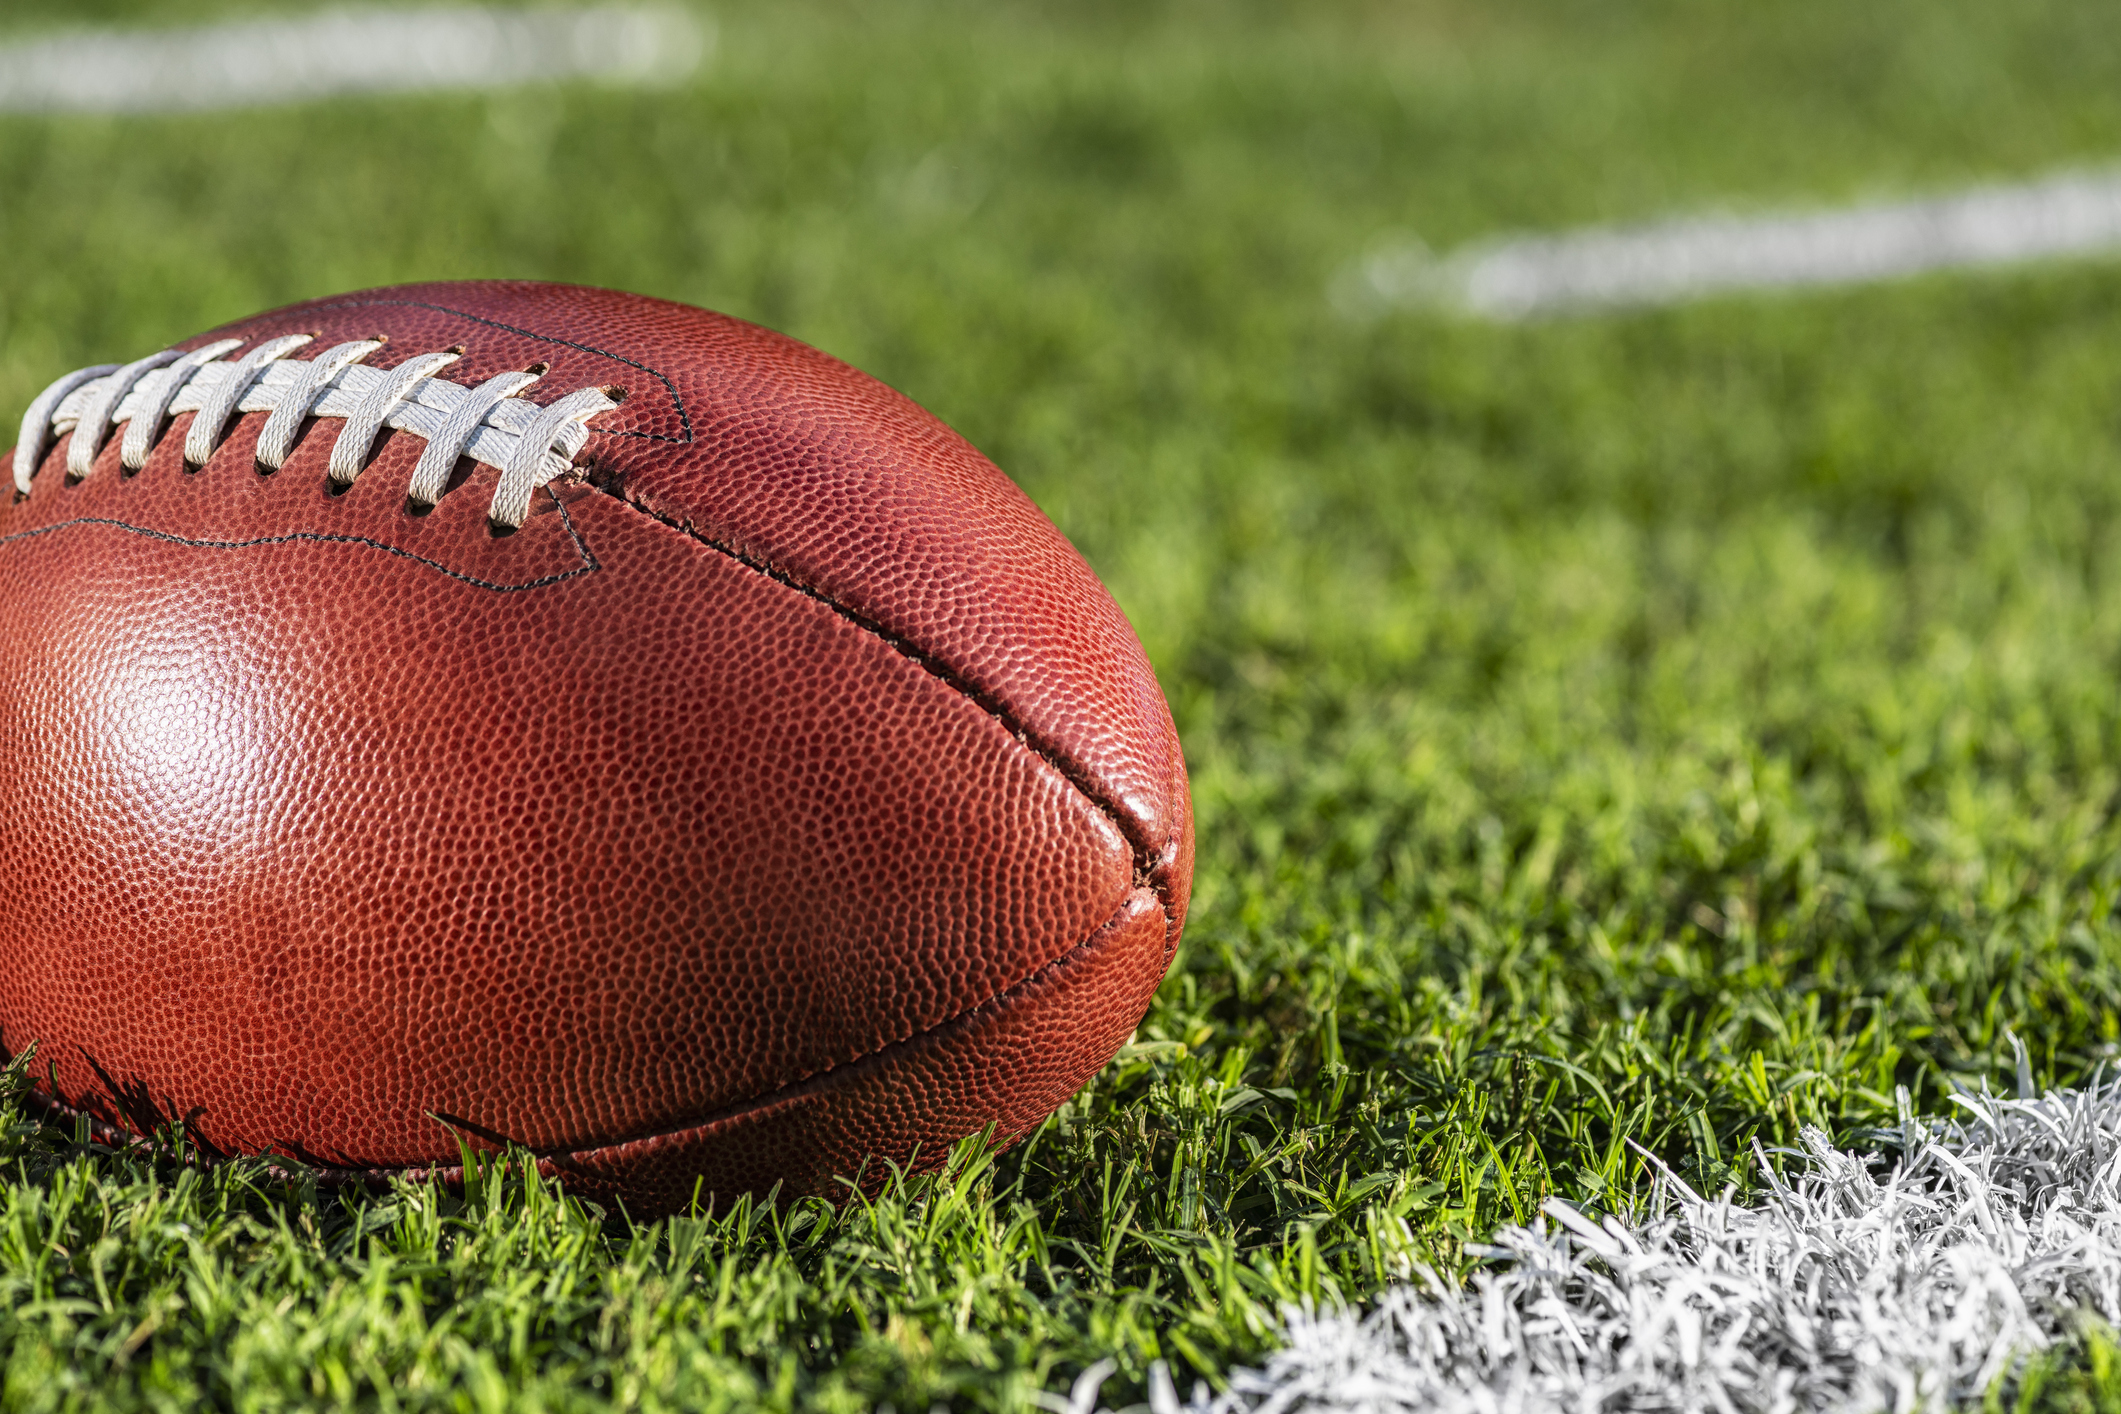 A low angle close-up view of a leather American Football sitting in the grass next to a white yard line with hash marks in the background. (Photo: iStock - cmannphoto)